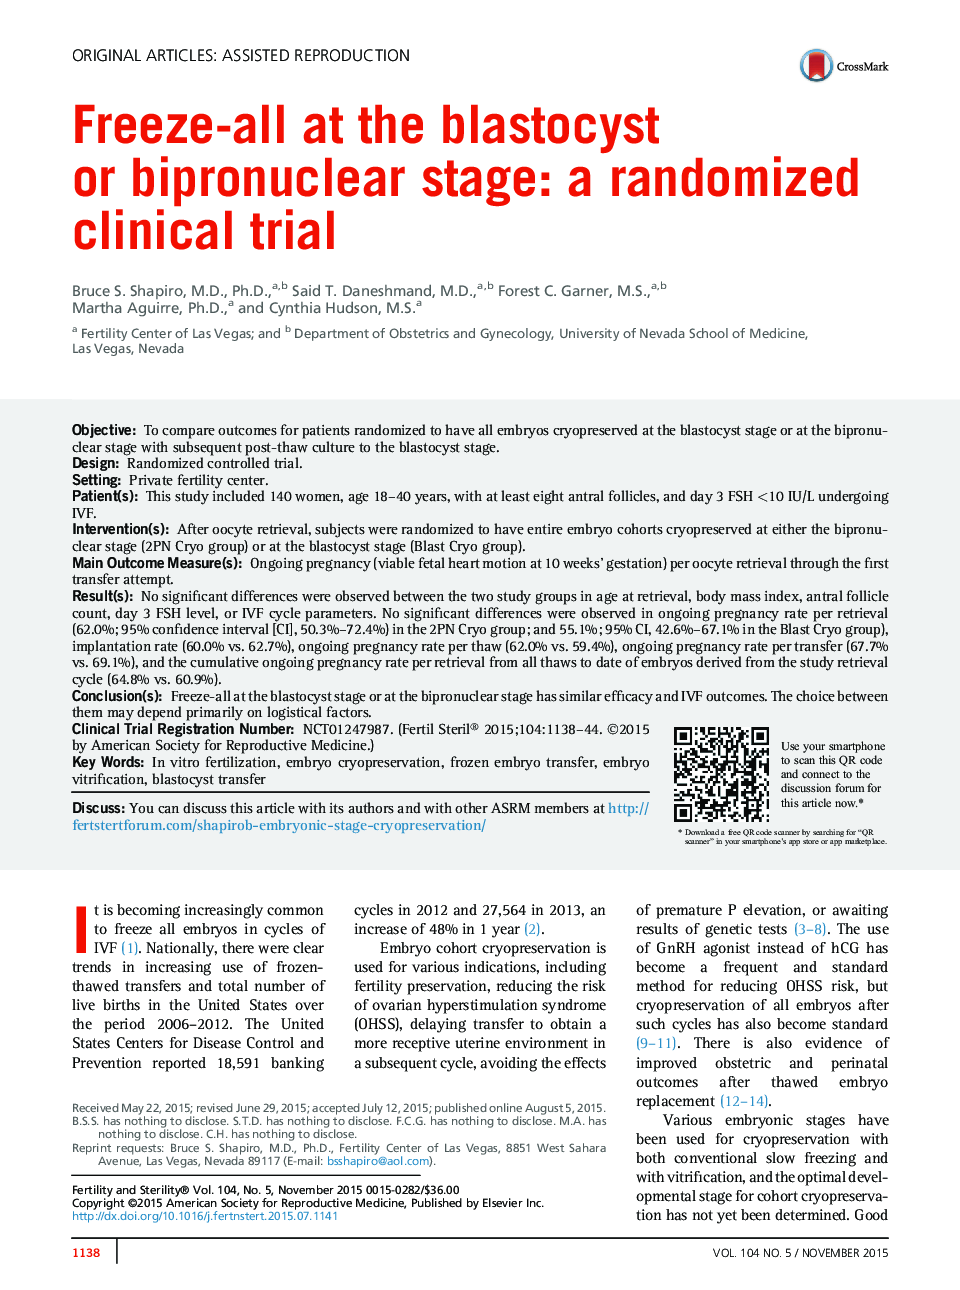 Freeze-all at the blastocyst or bipronuclear stage: a randomized clinical trial 